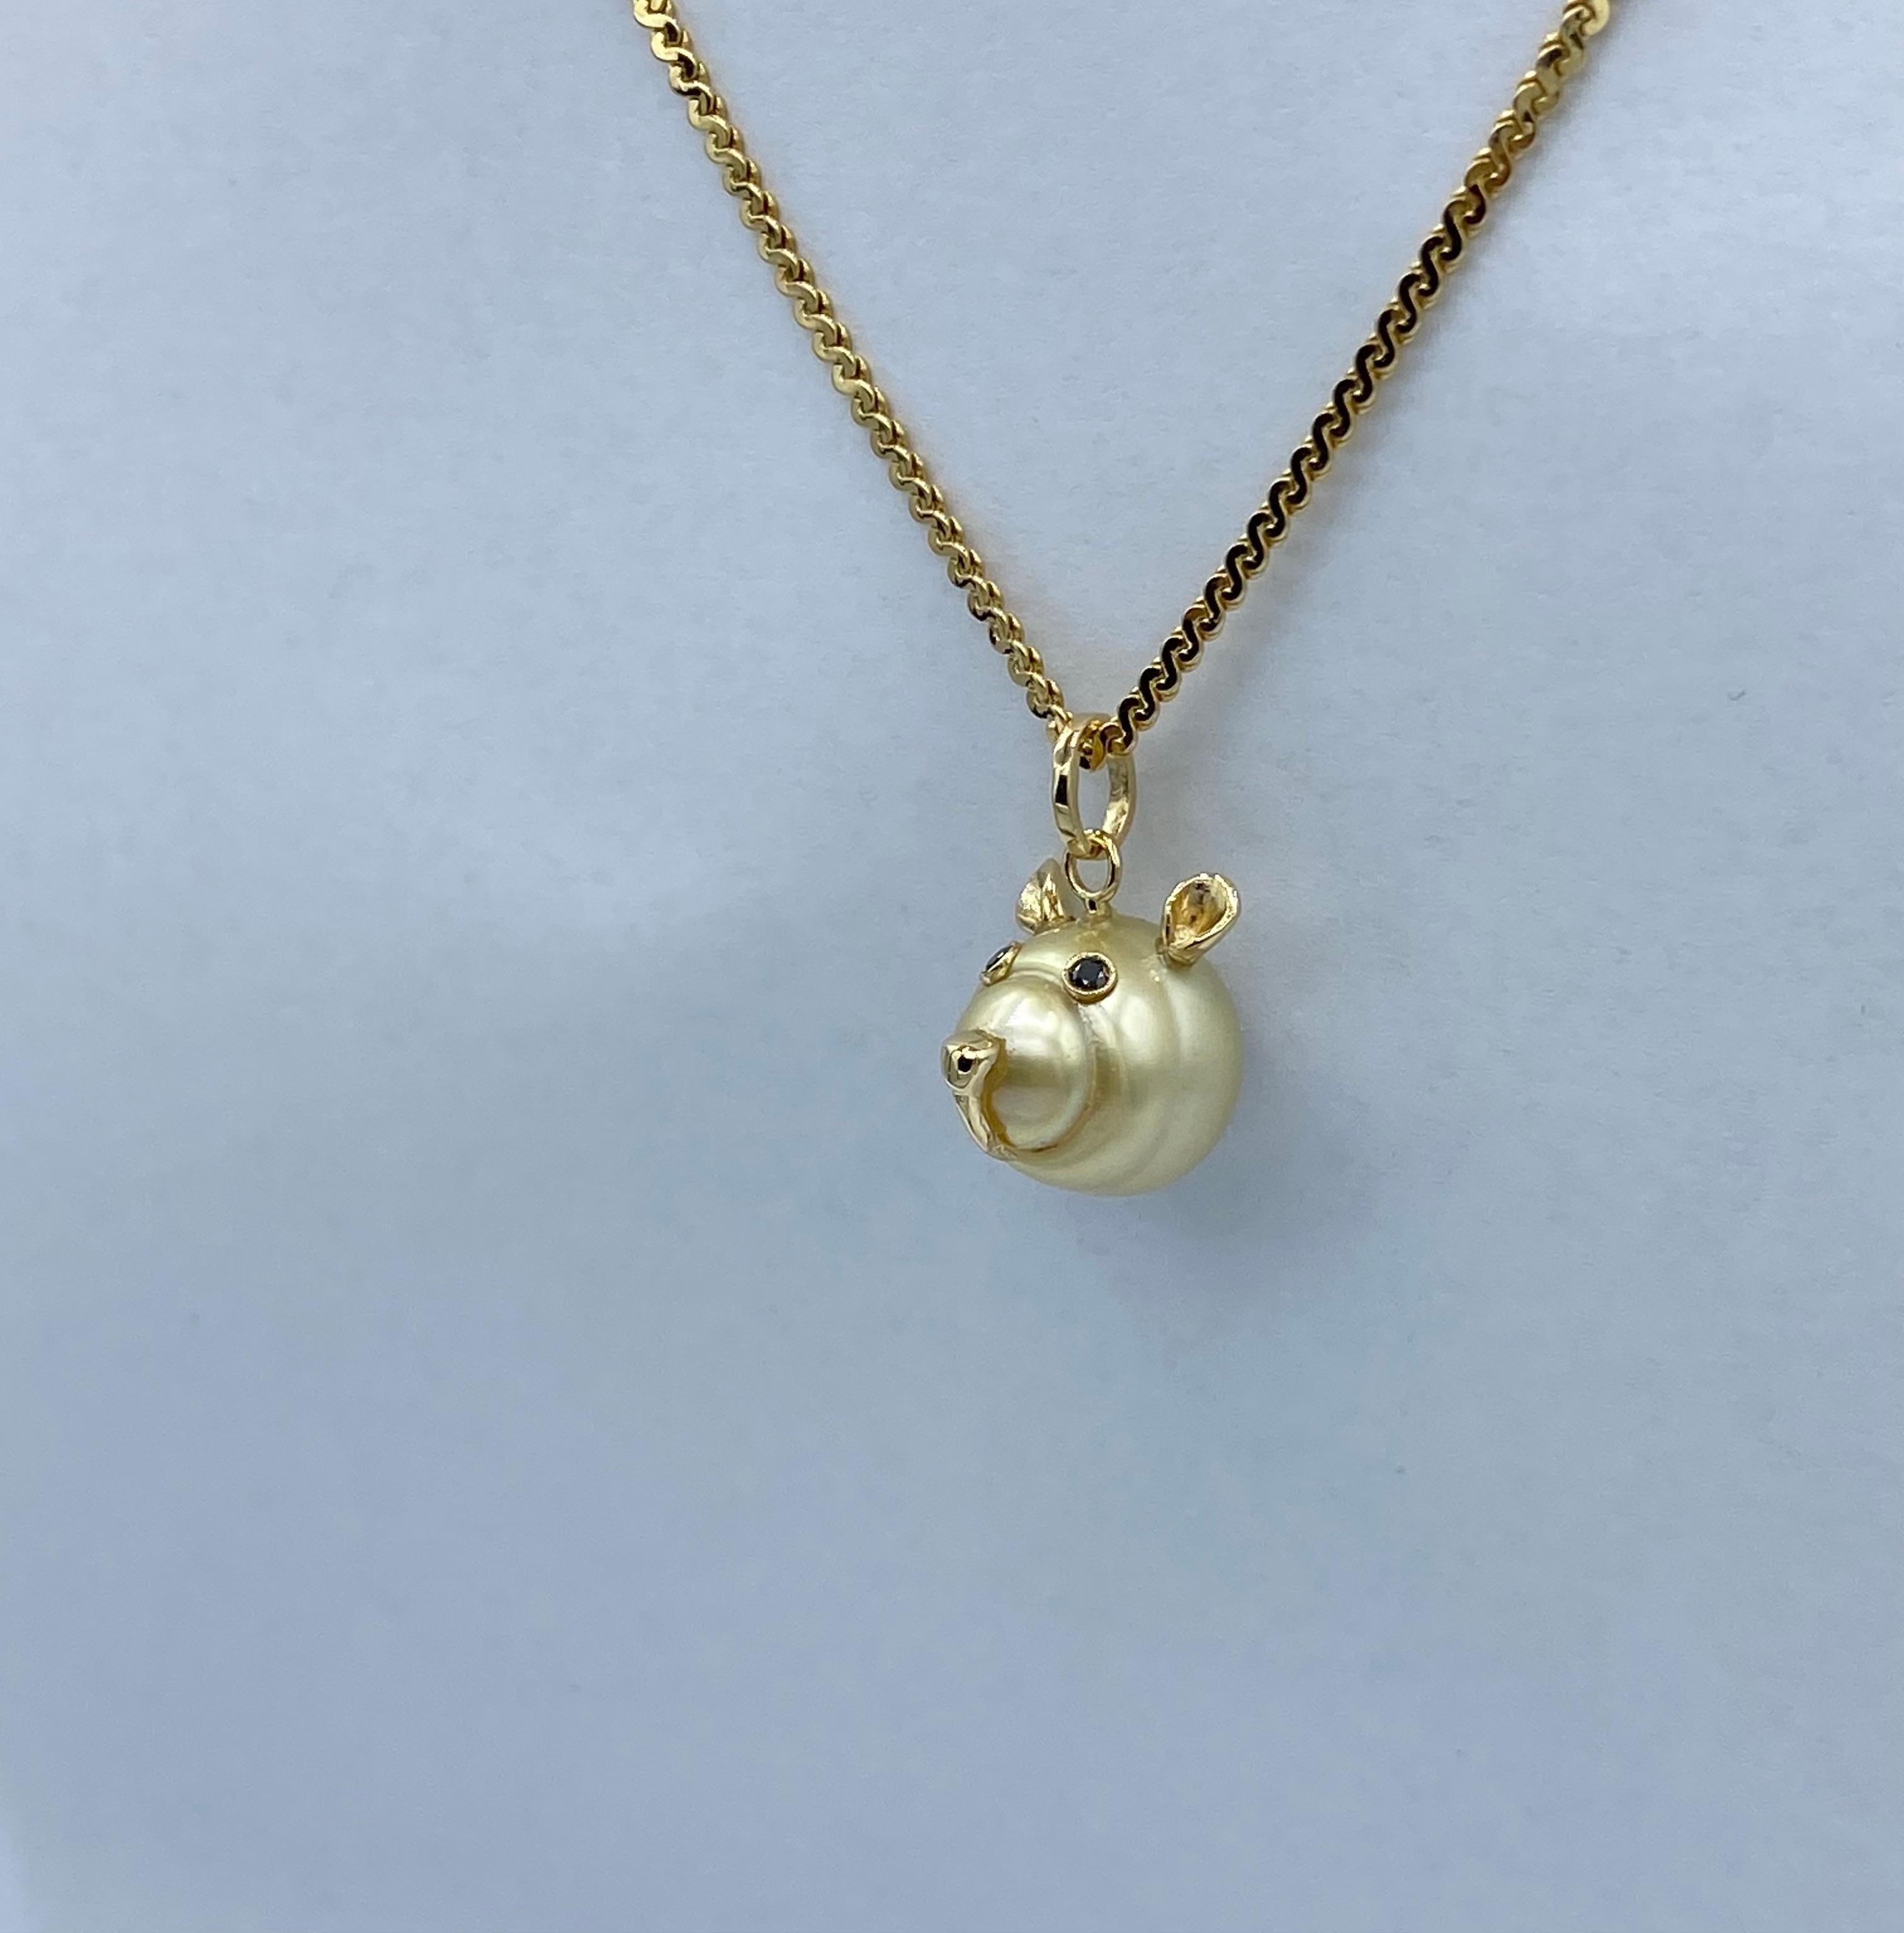 Teddy Bear Black Diamond 18 Karat Gold Australian Pearl Pendant Necklace
I use a cultured Australian gold pearl to make a little head of a bear. All the particulars are in 18 karat yellow gold. 
The eyes have a black diamond each, they are ct 0,04